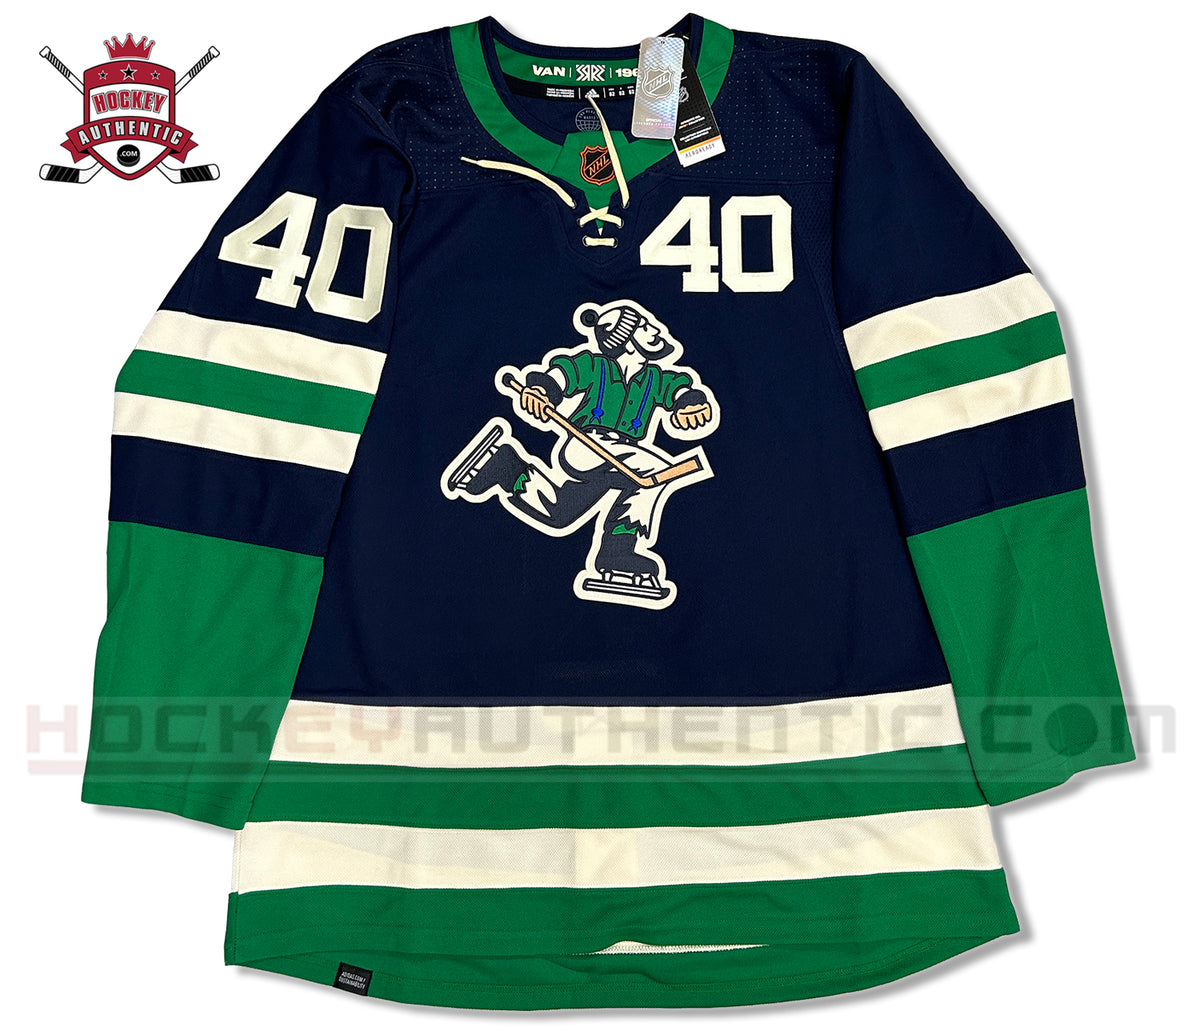 New Canucks reverse retro jersey features Johnny Canuck (PHOTOS